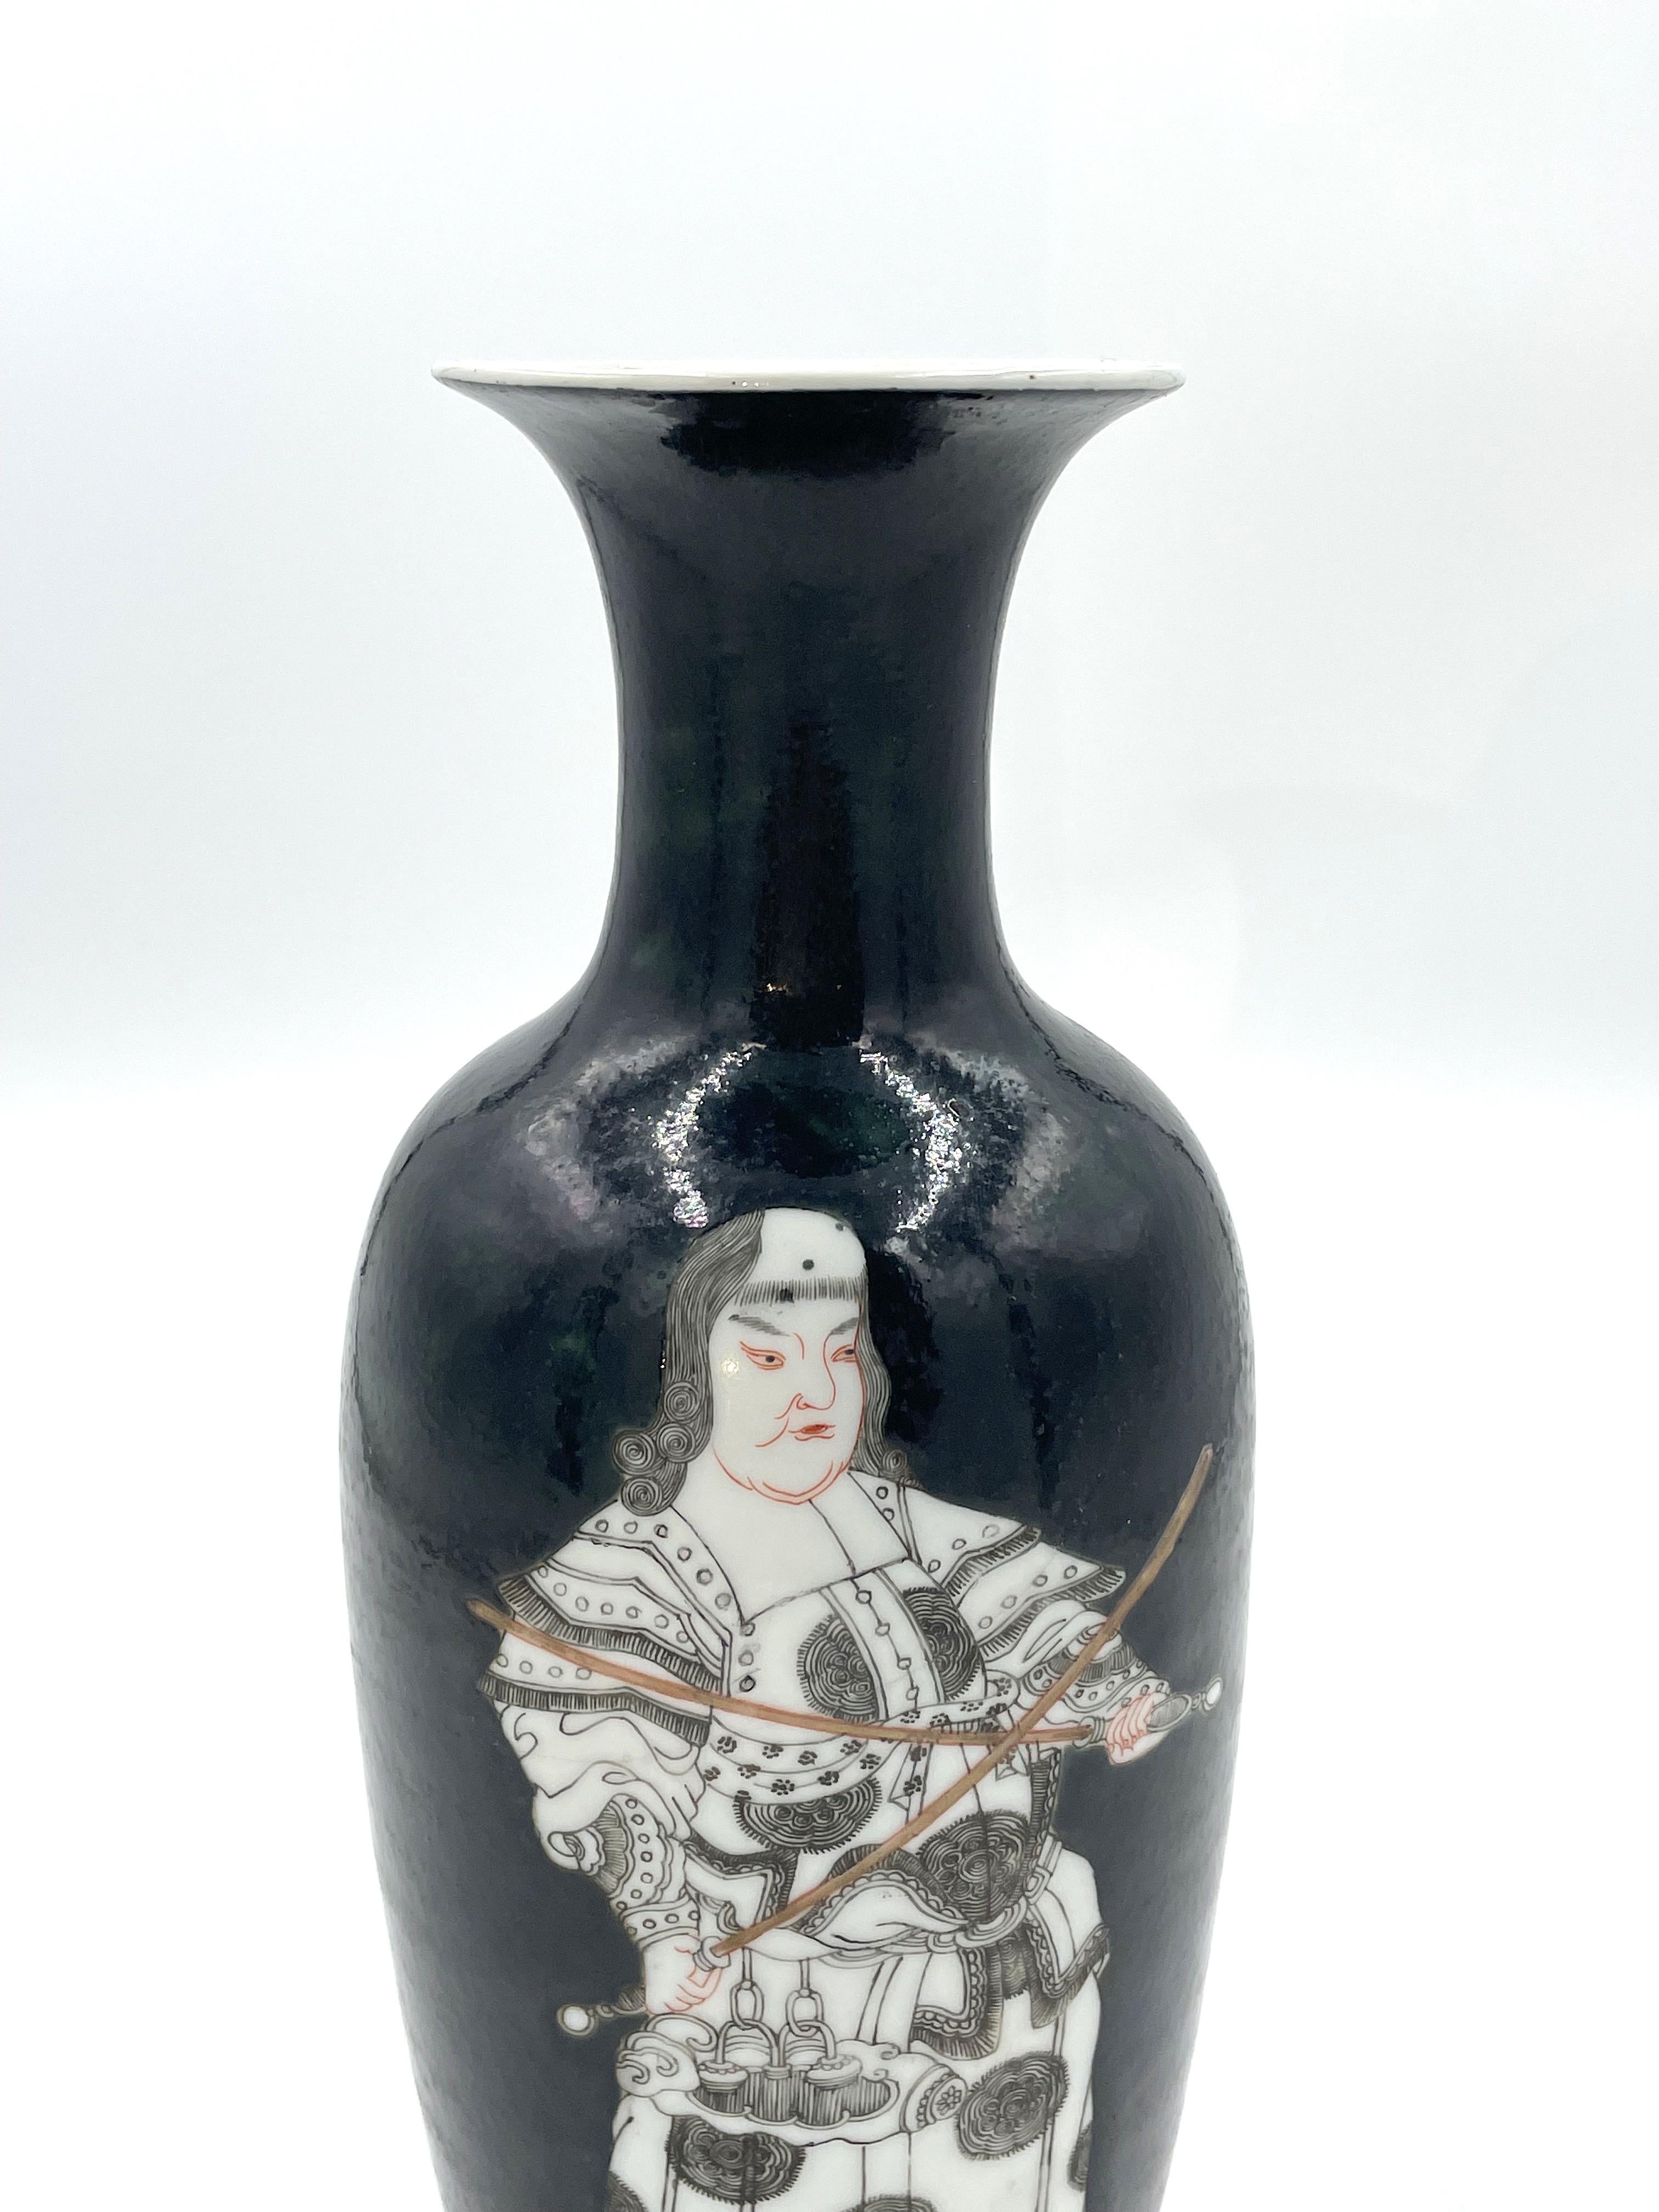 Porcelain Chinese Vase with Two Figures, Qing Emperor Kangxi Period